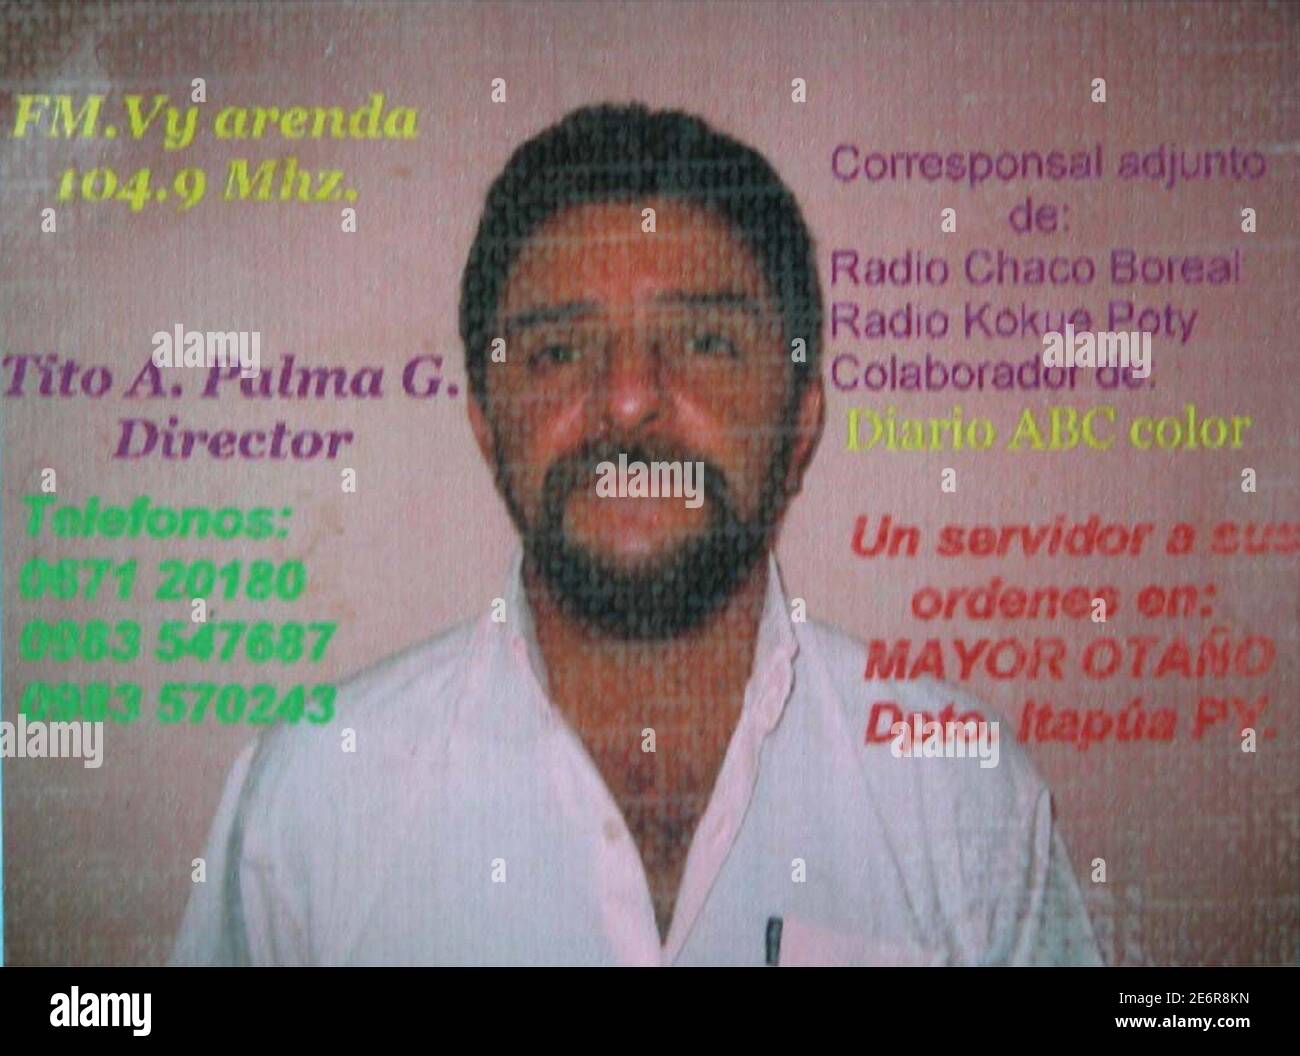 A publicity poster shows the face of Chilean journalist Tito Alberto Palma with a list of his telephone numbers and the media he worked for, in Mayor Otano where Palma lived 450 kms (280 miles) southeast of Asuncion, August 23, 2007. Palma was shot dead on August 22 as he sat at dinner with his family and the local police think his murder was in revenge for his reports against drug and gasoline smugglers along the border with Brazil. Picture taken August 23, 2007.  REUTERS/Ultima Hora  (PARAGUAY) Stock Photo